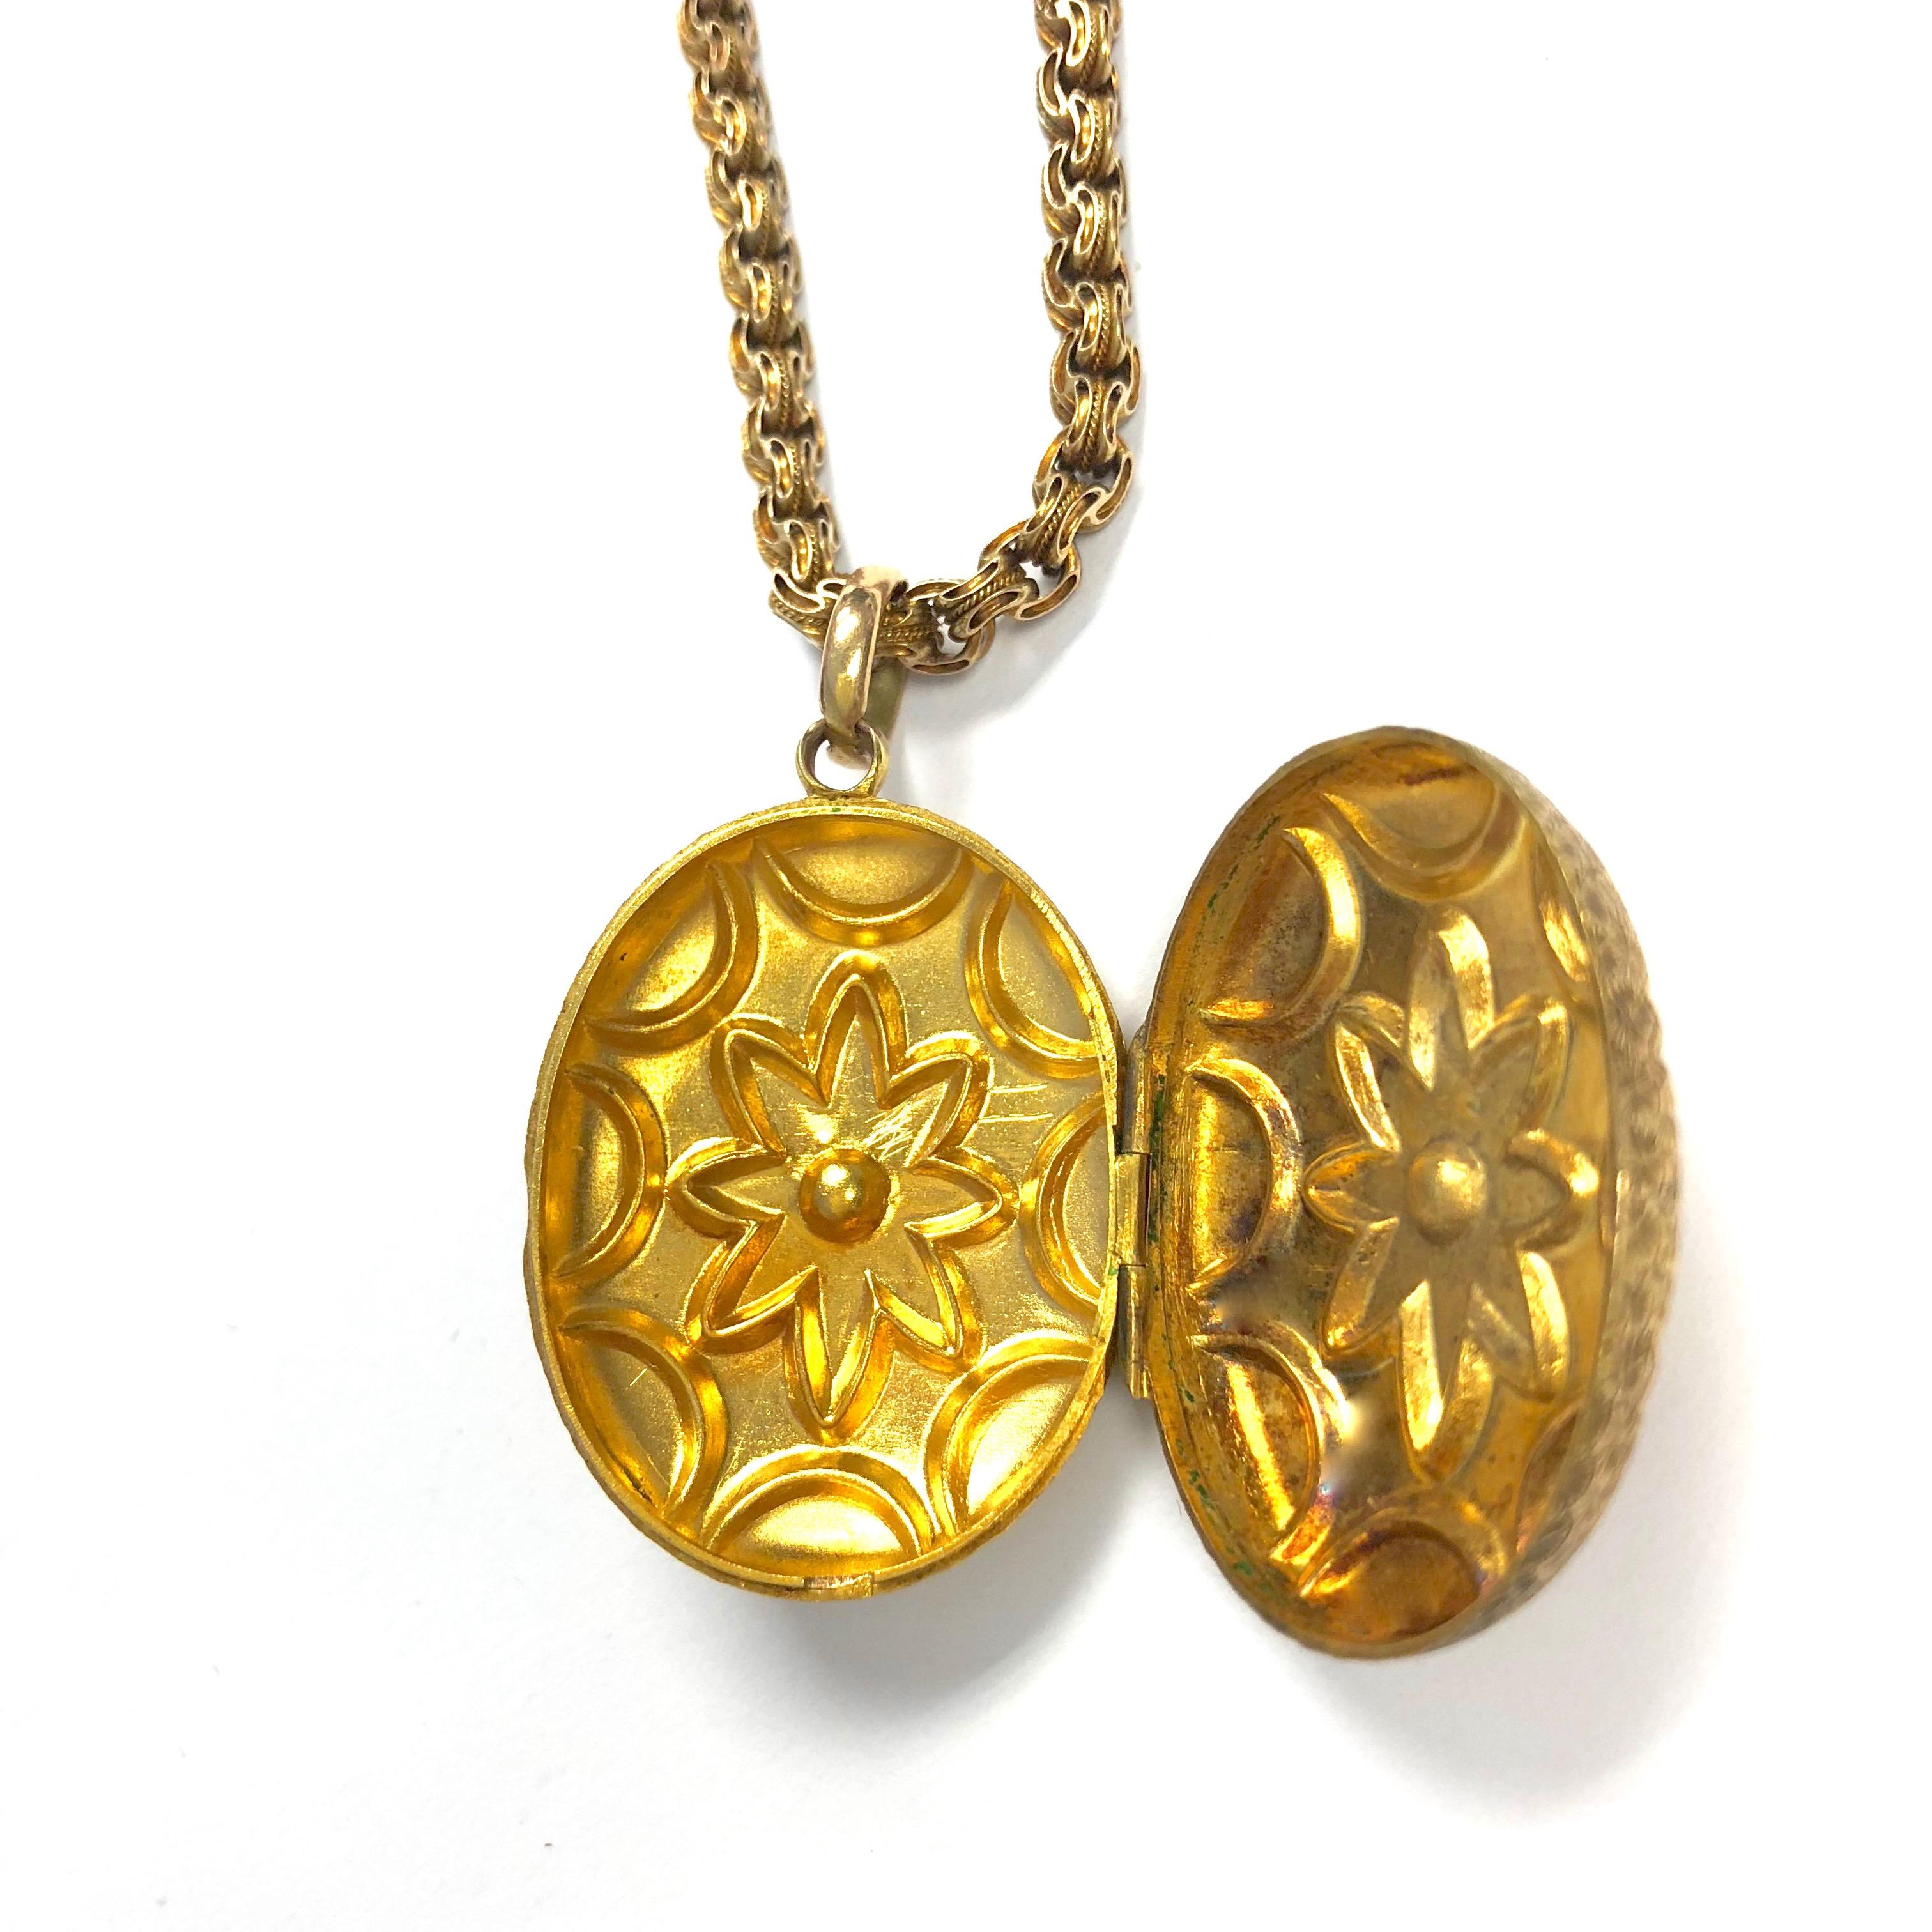 Crafted in 14K yellow gold, the locket features a mirrored design of coral and hand engraving on each side. The pendant is supported by an eighteen inch length antique chain terminating in spring-ring claps. 
Pendant measurements: 1 